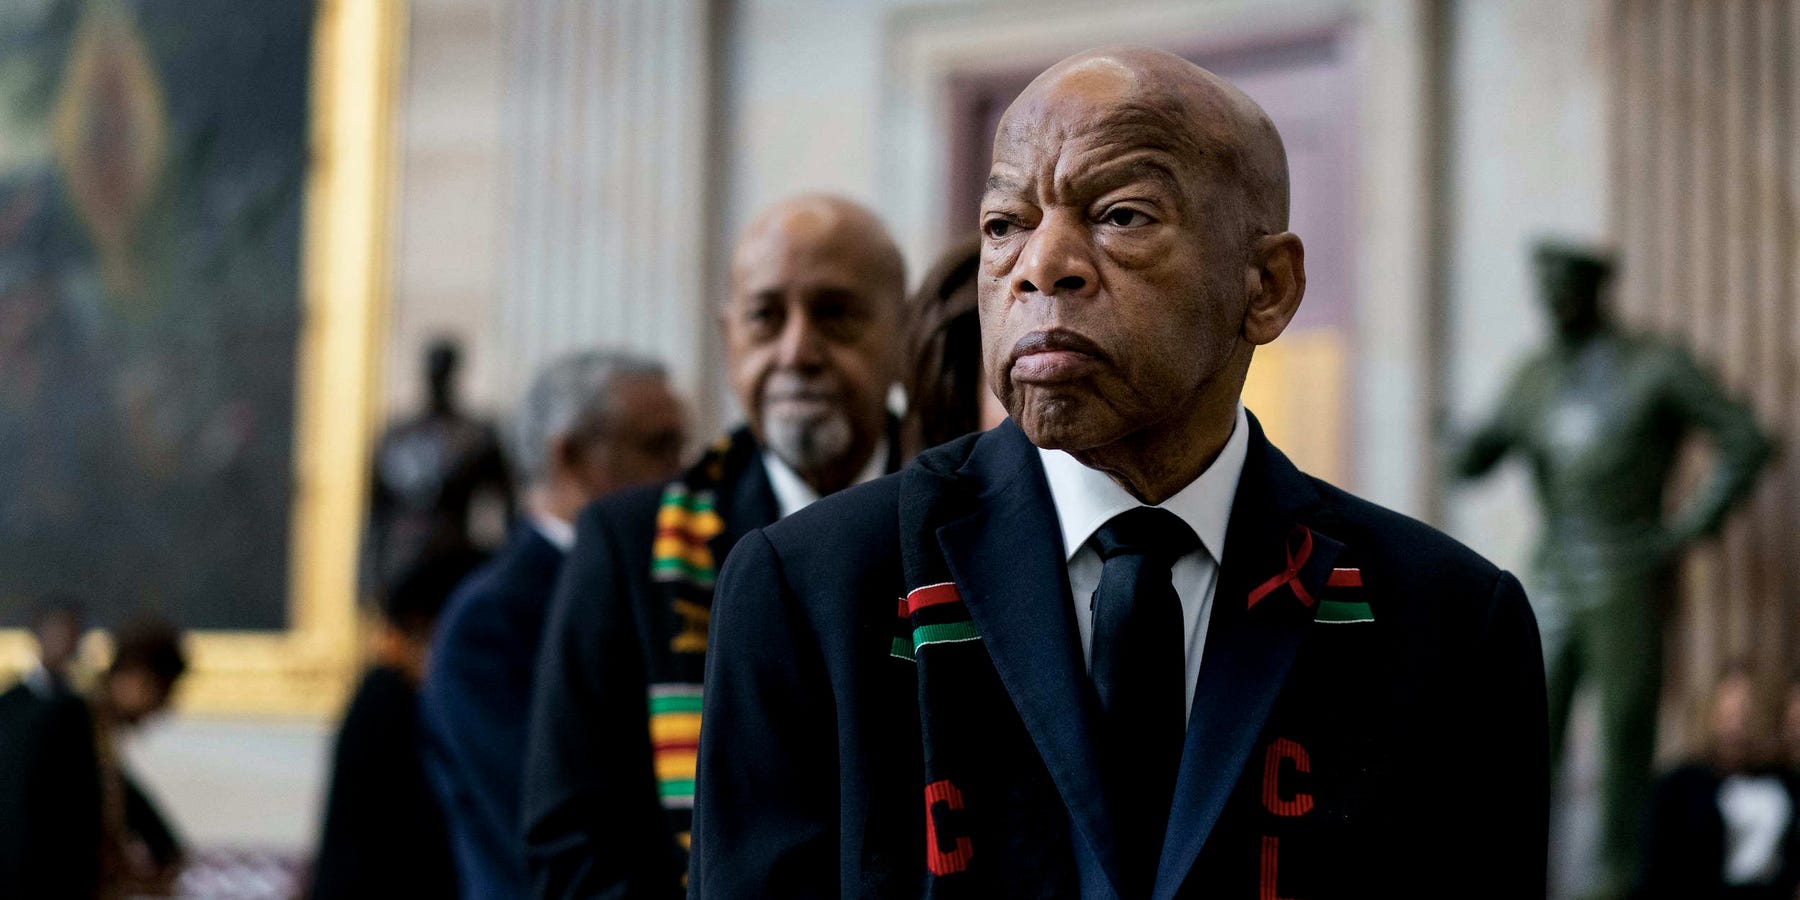 Rep. John Lewis, Civil Rights Icon, Was A Powerful Voice Against War With Iraq